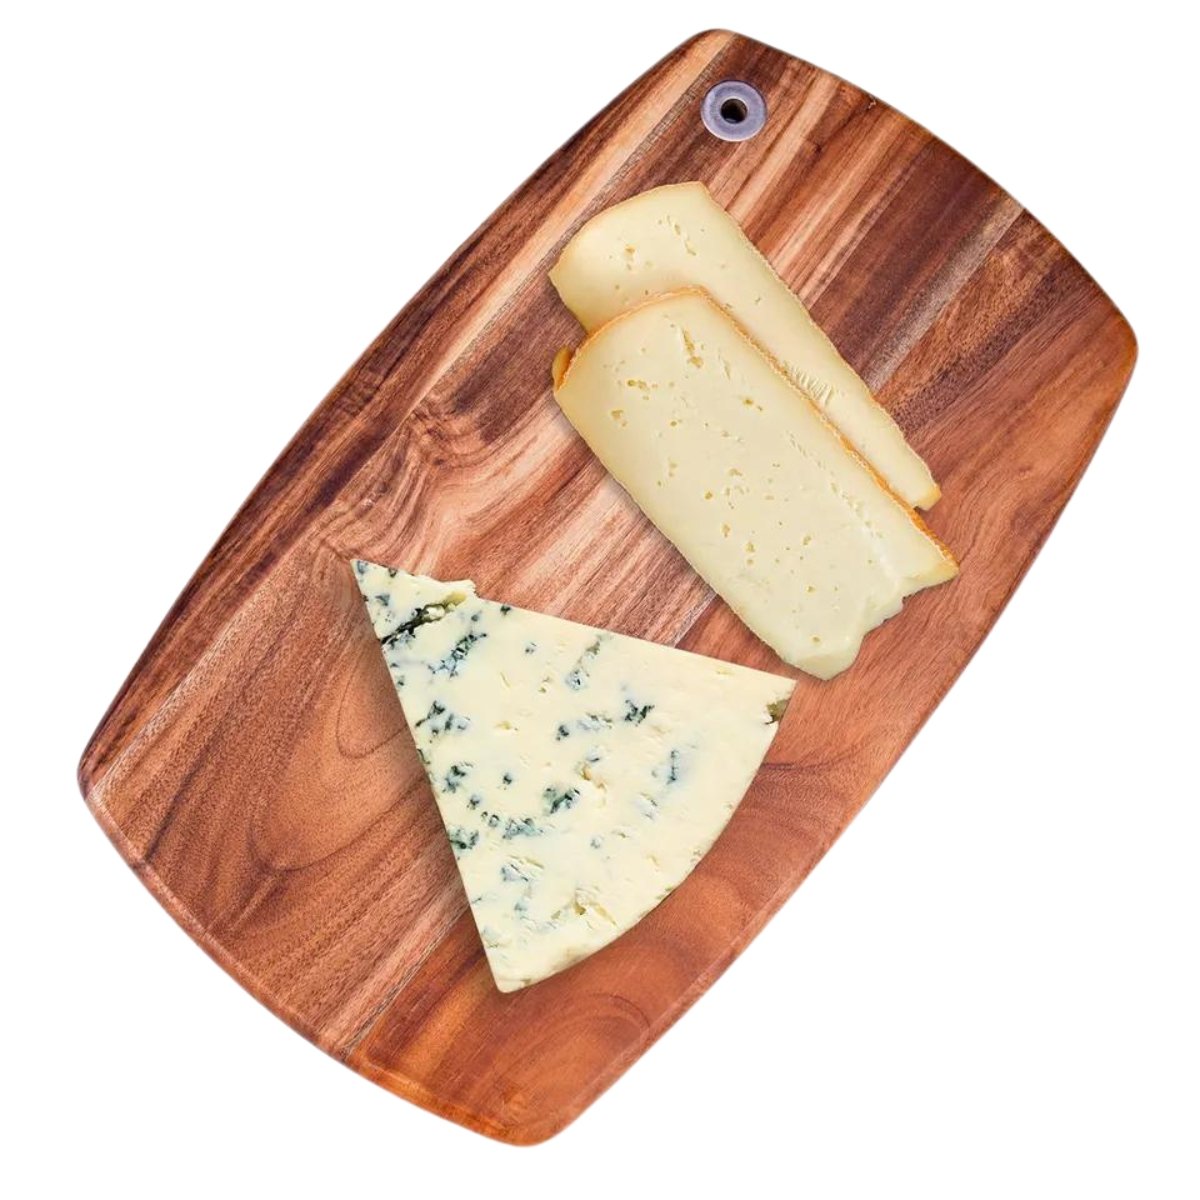 Acacia Wood Charcuterie Cheese Board for Food Meats Bread - Rustic Furniture Outlet